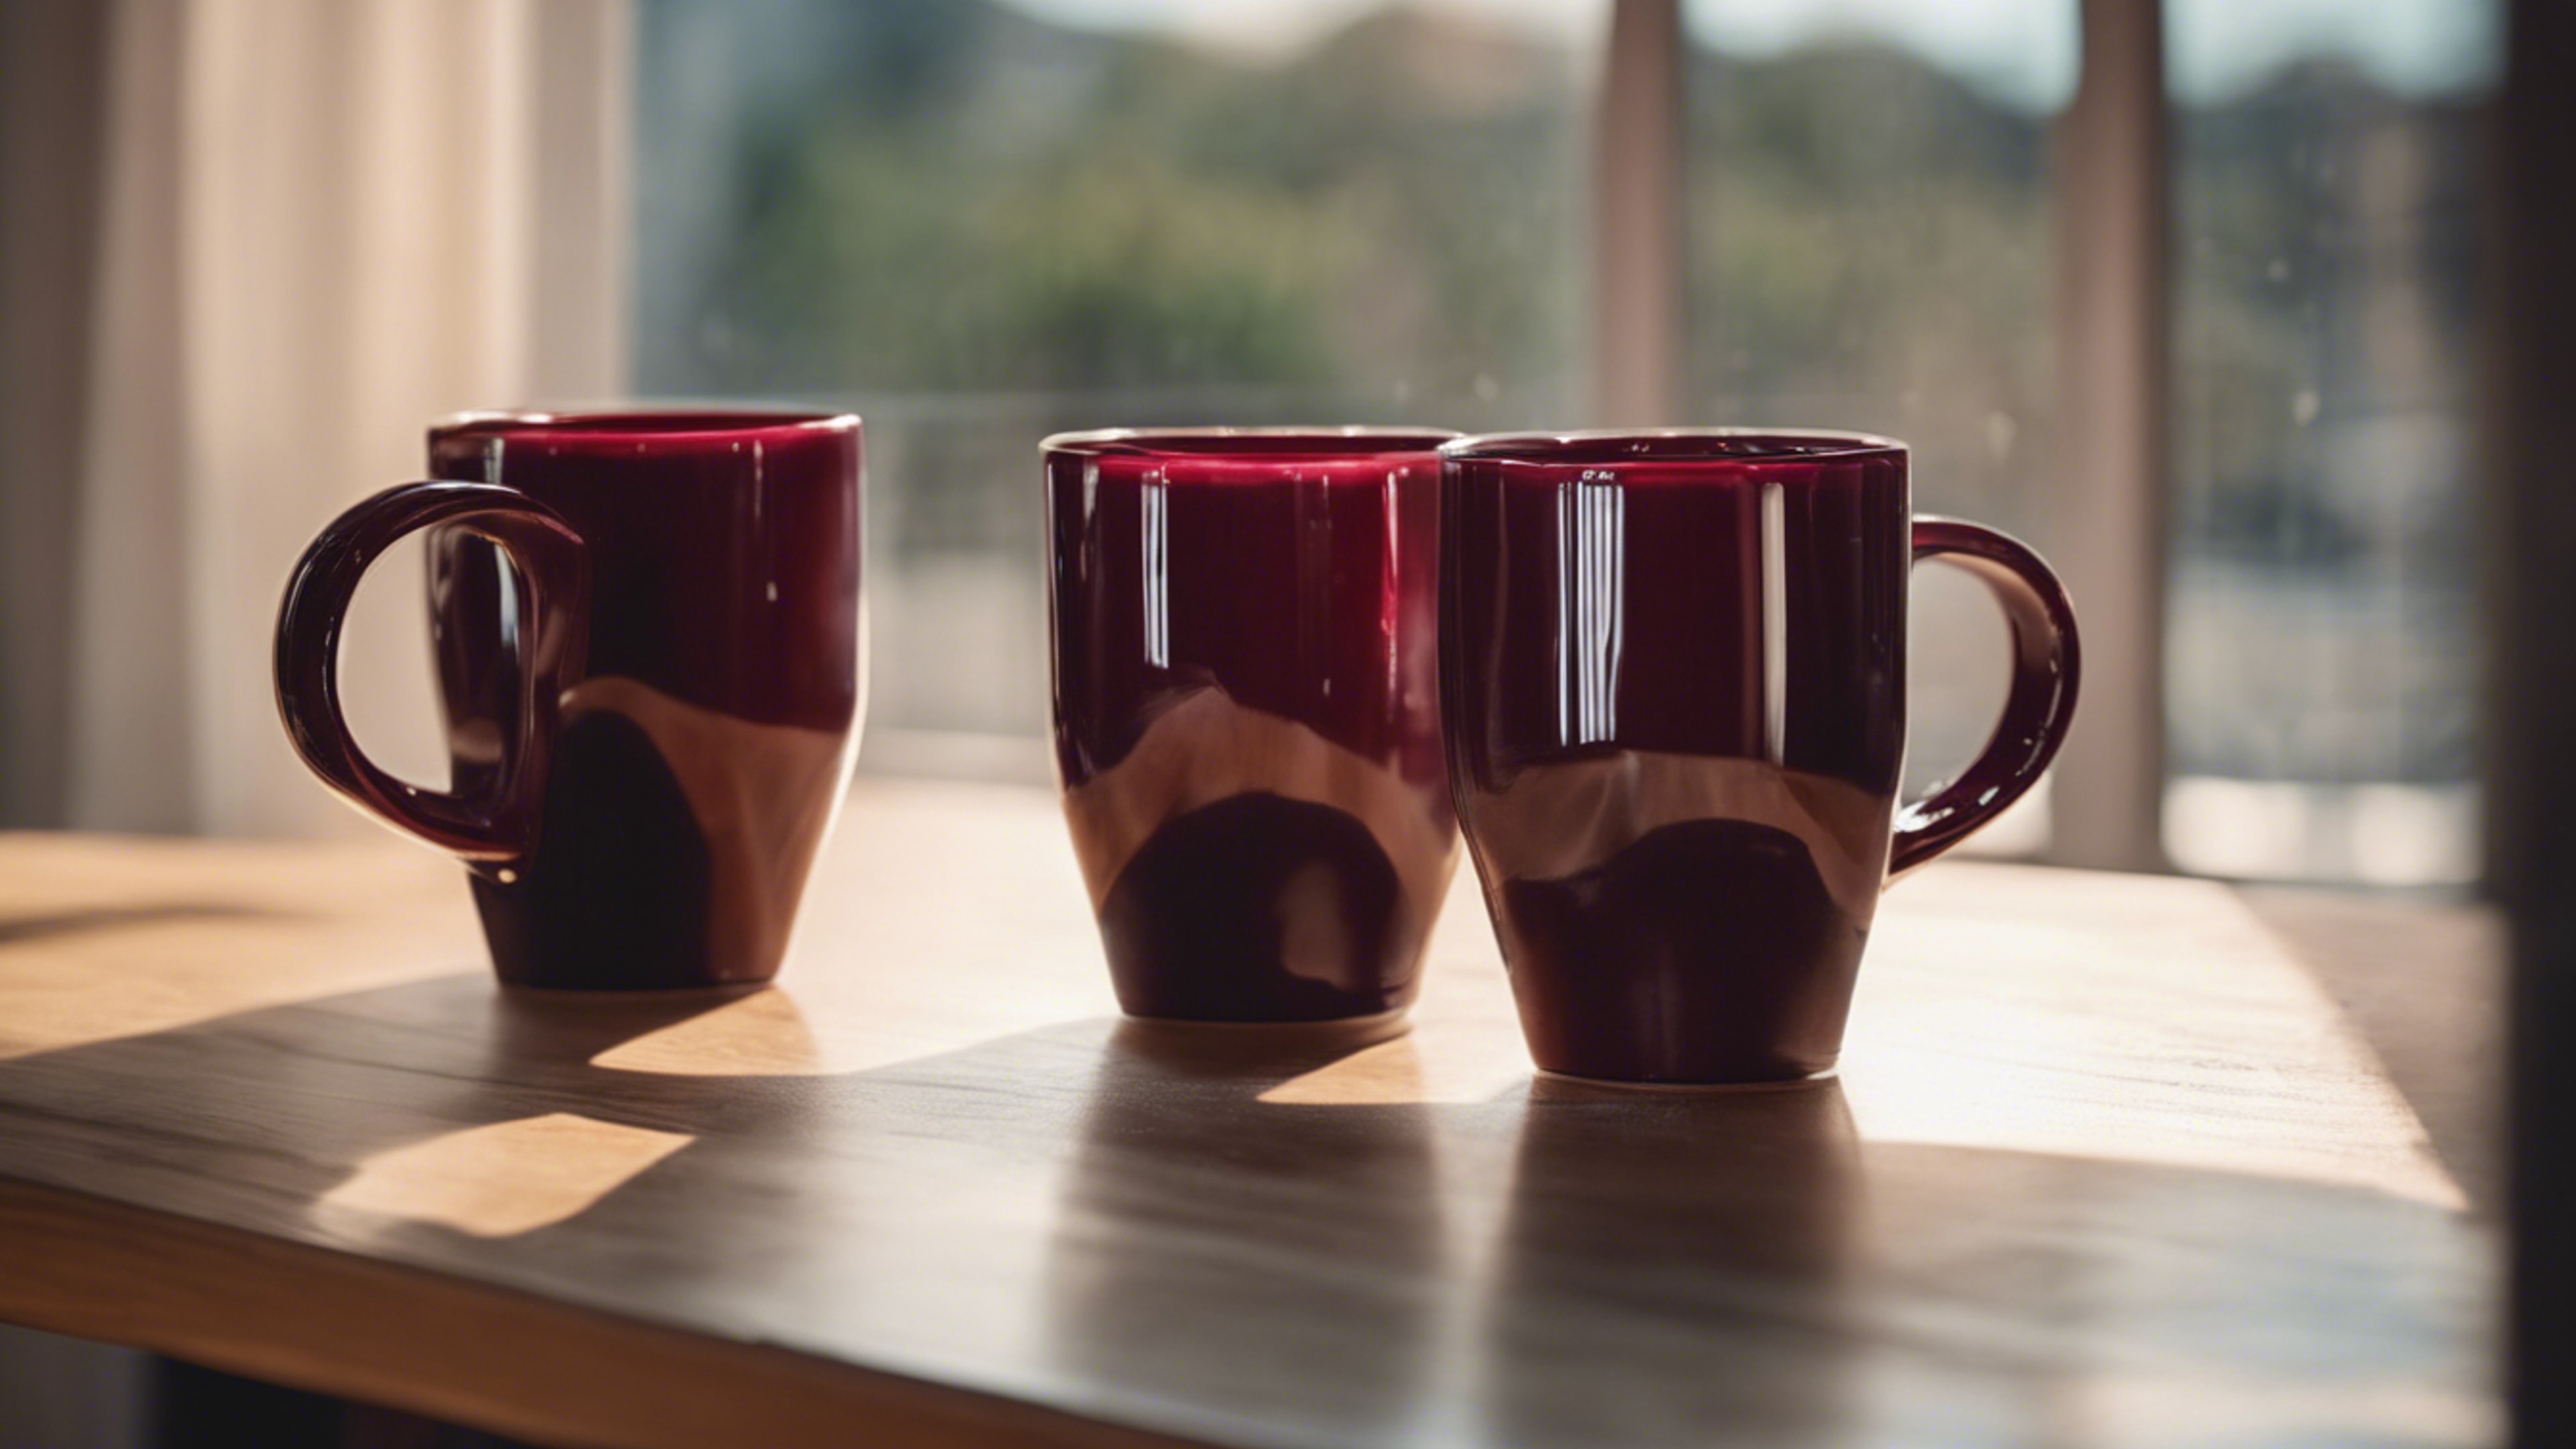 Two cool maroon ceramic coffee mugs set on a wooden table in front of a sunny window. Wallpaper[32923f9dbf0d44d9b281]